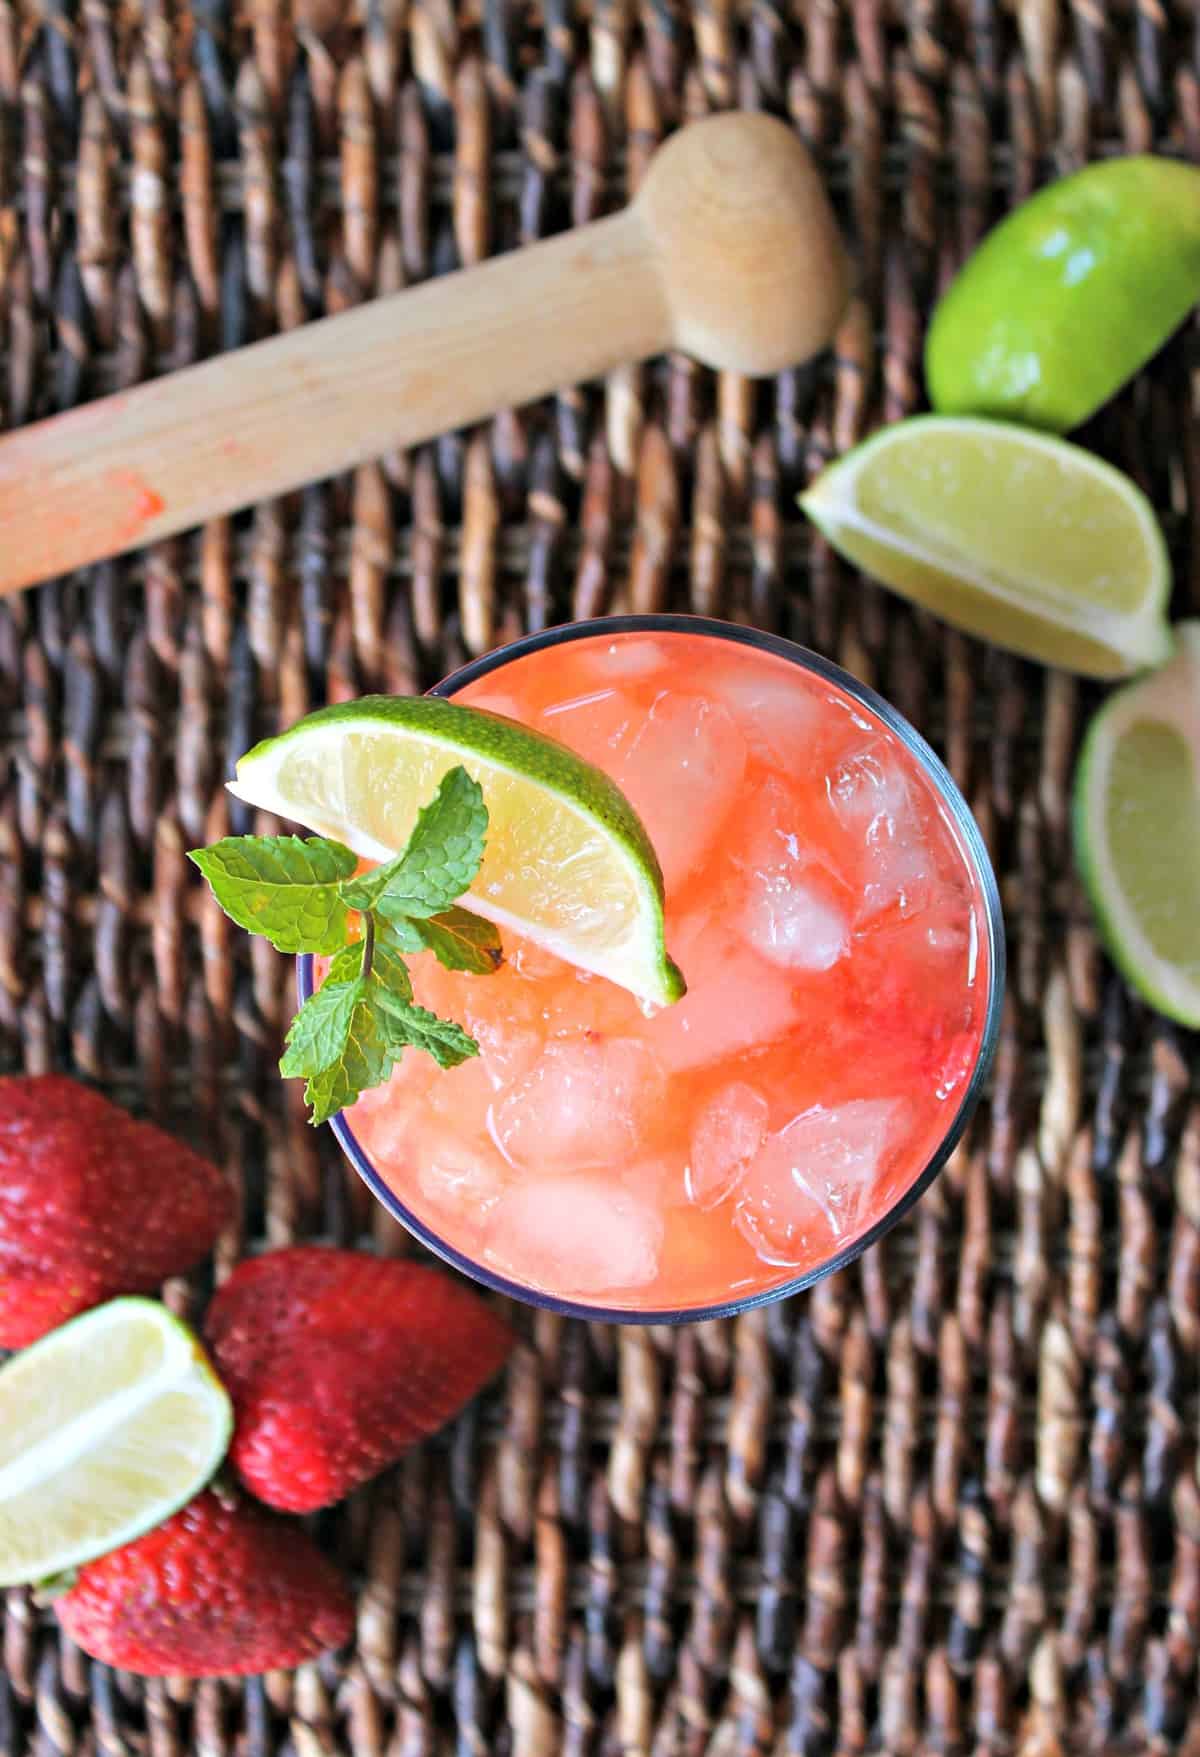 Strawberry Mojitos! Sweet and refreshing, these cocktails are a great addition to summer menus! The flavors of fresh strawberries, lime and mint come together to create a berry-infused version of a delicious classic.